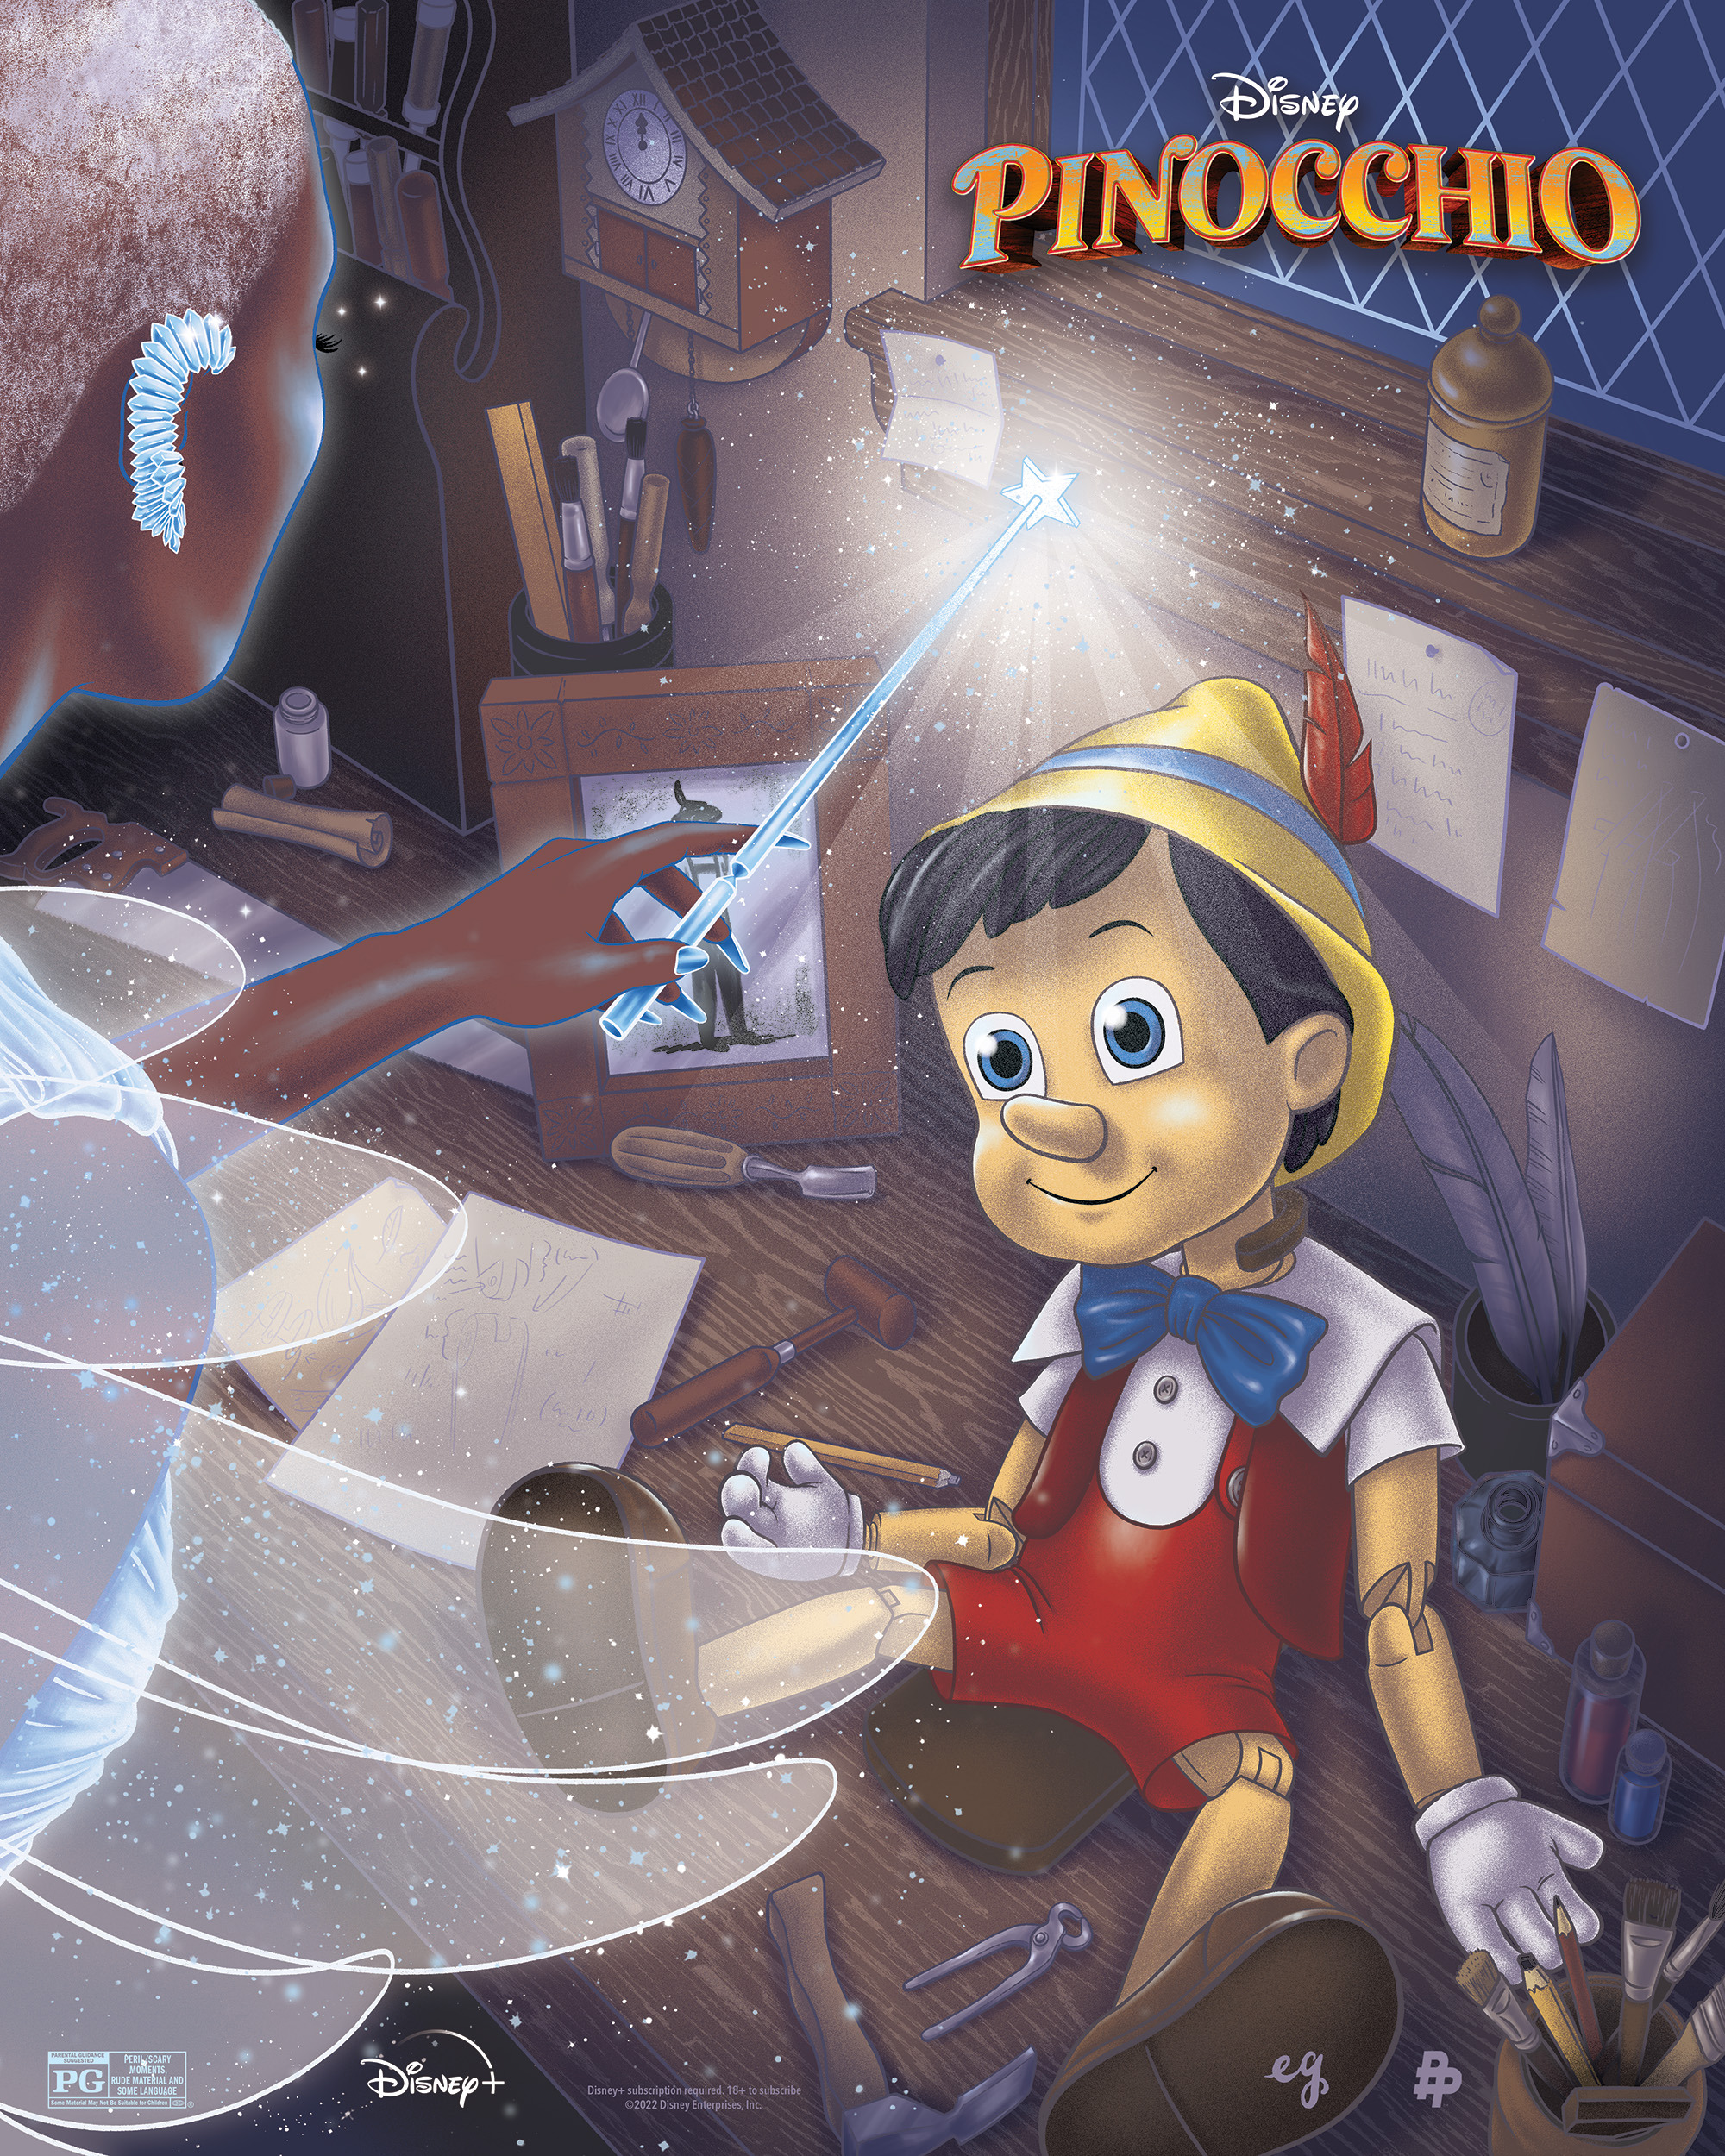 Mega Sized Movie Poster Image for Pinocchio (#14 of 17)